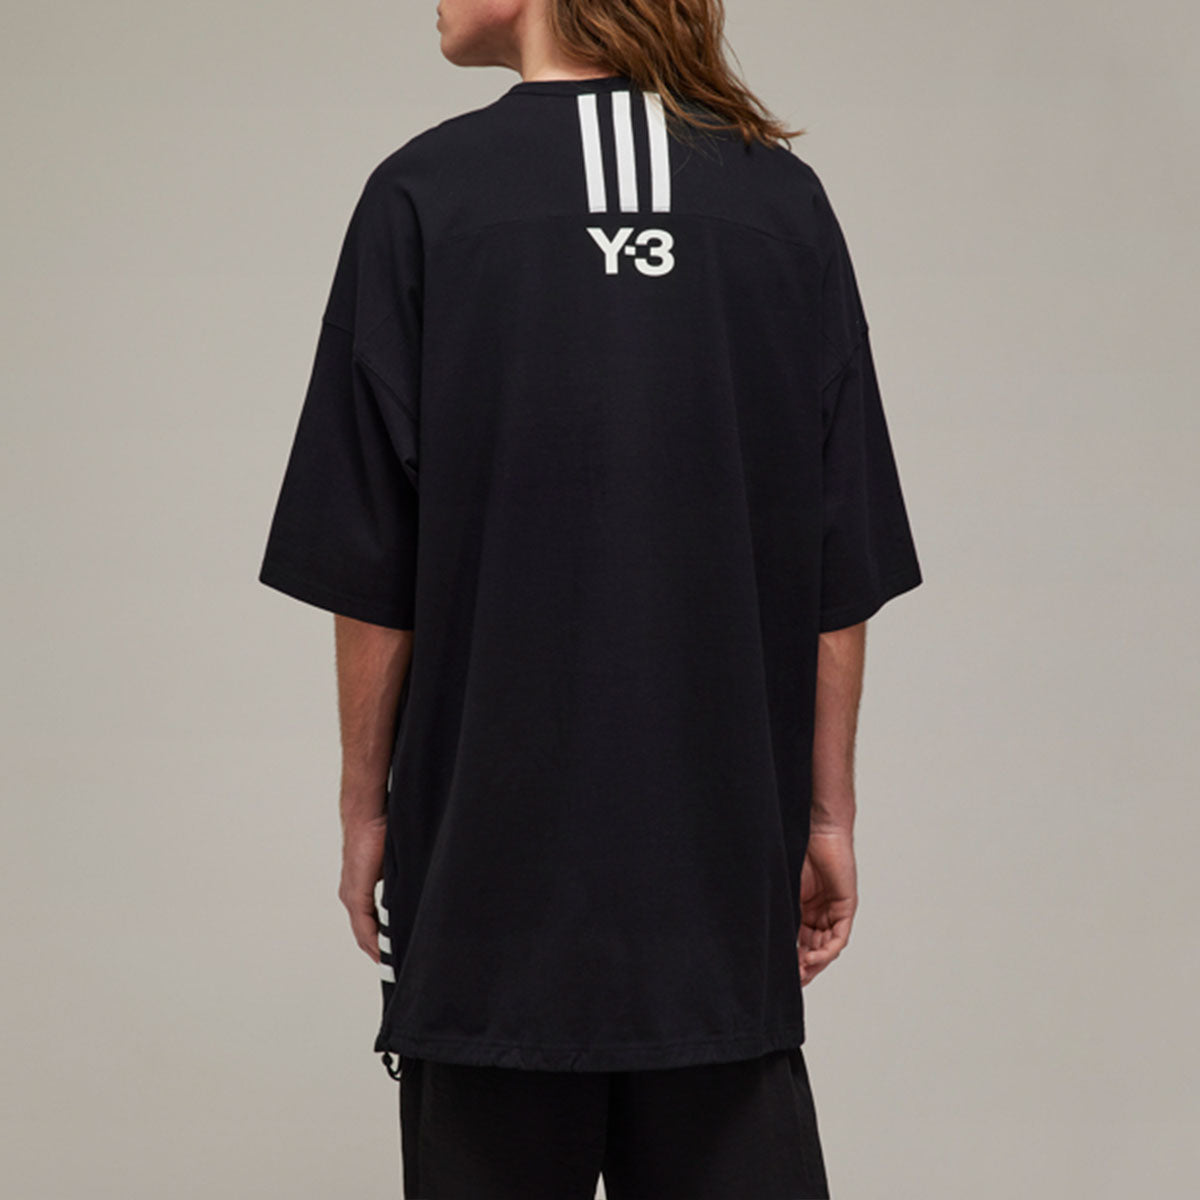 M CH1 OVERSIZED SS TEE - STRIPES - Why are you here?